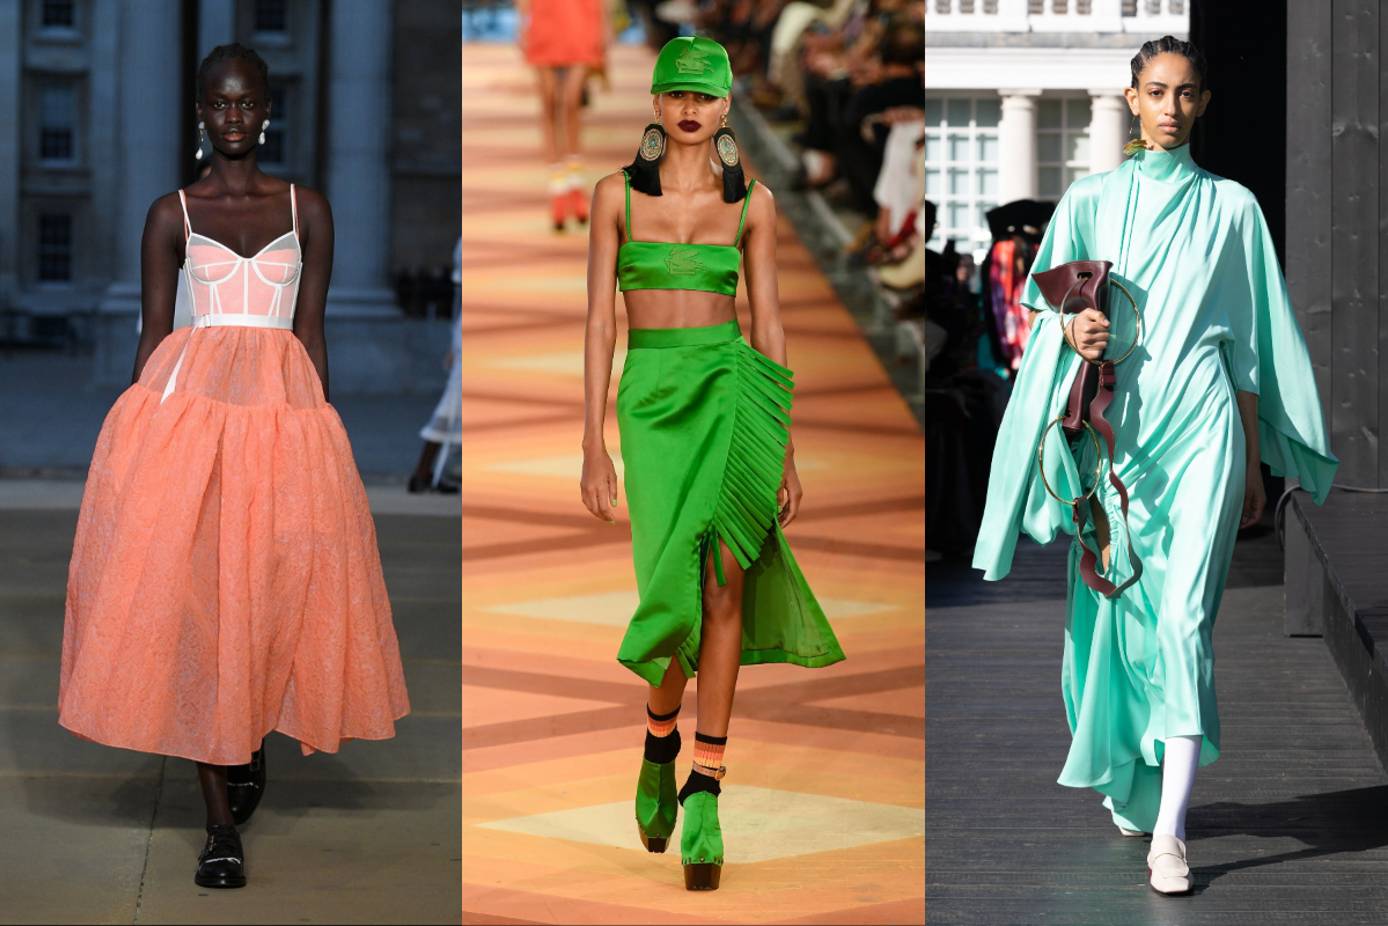 Did The Runways Predict the 2021 Pantone Color of the Year?